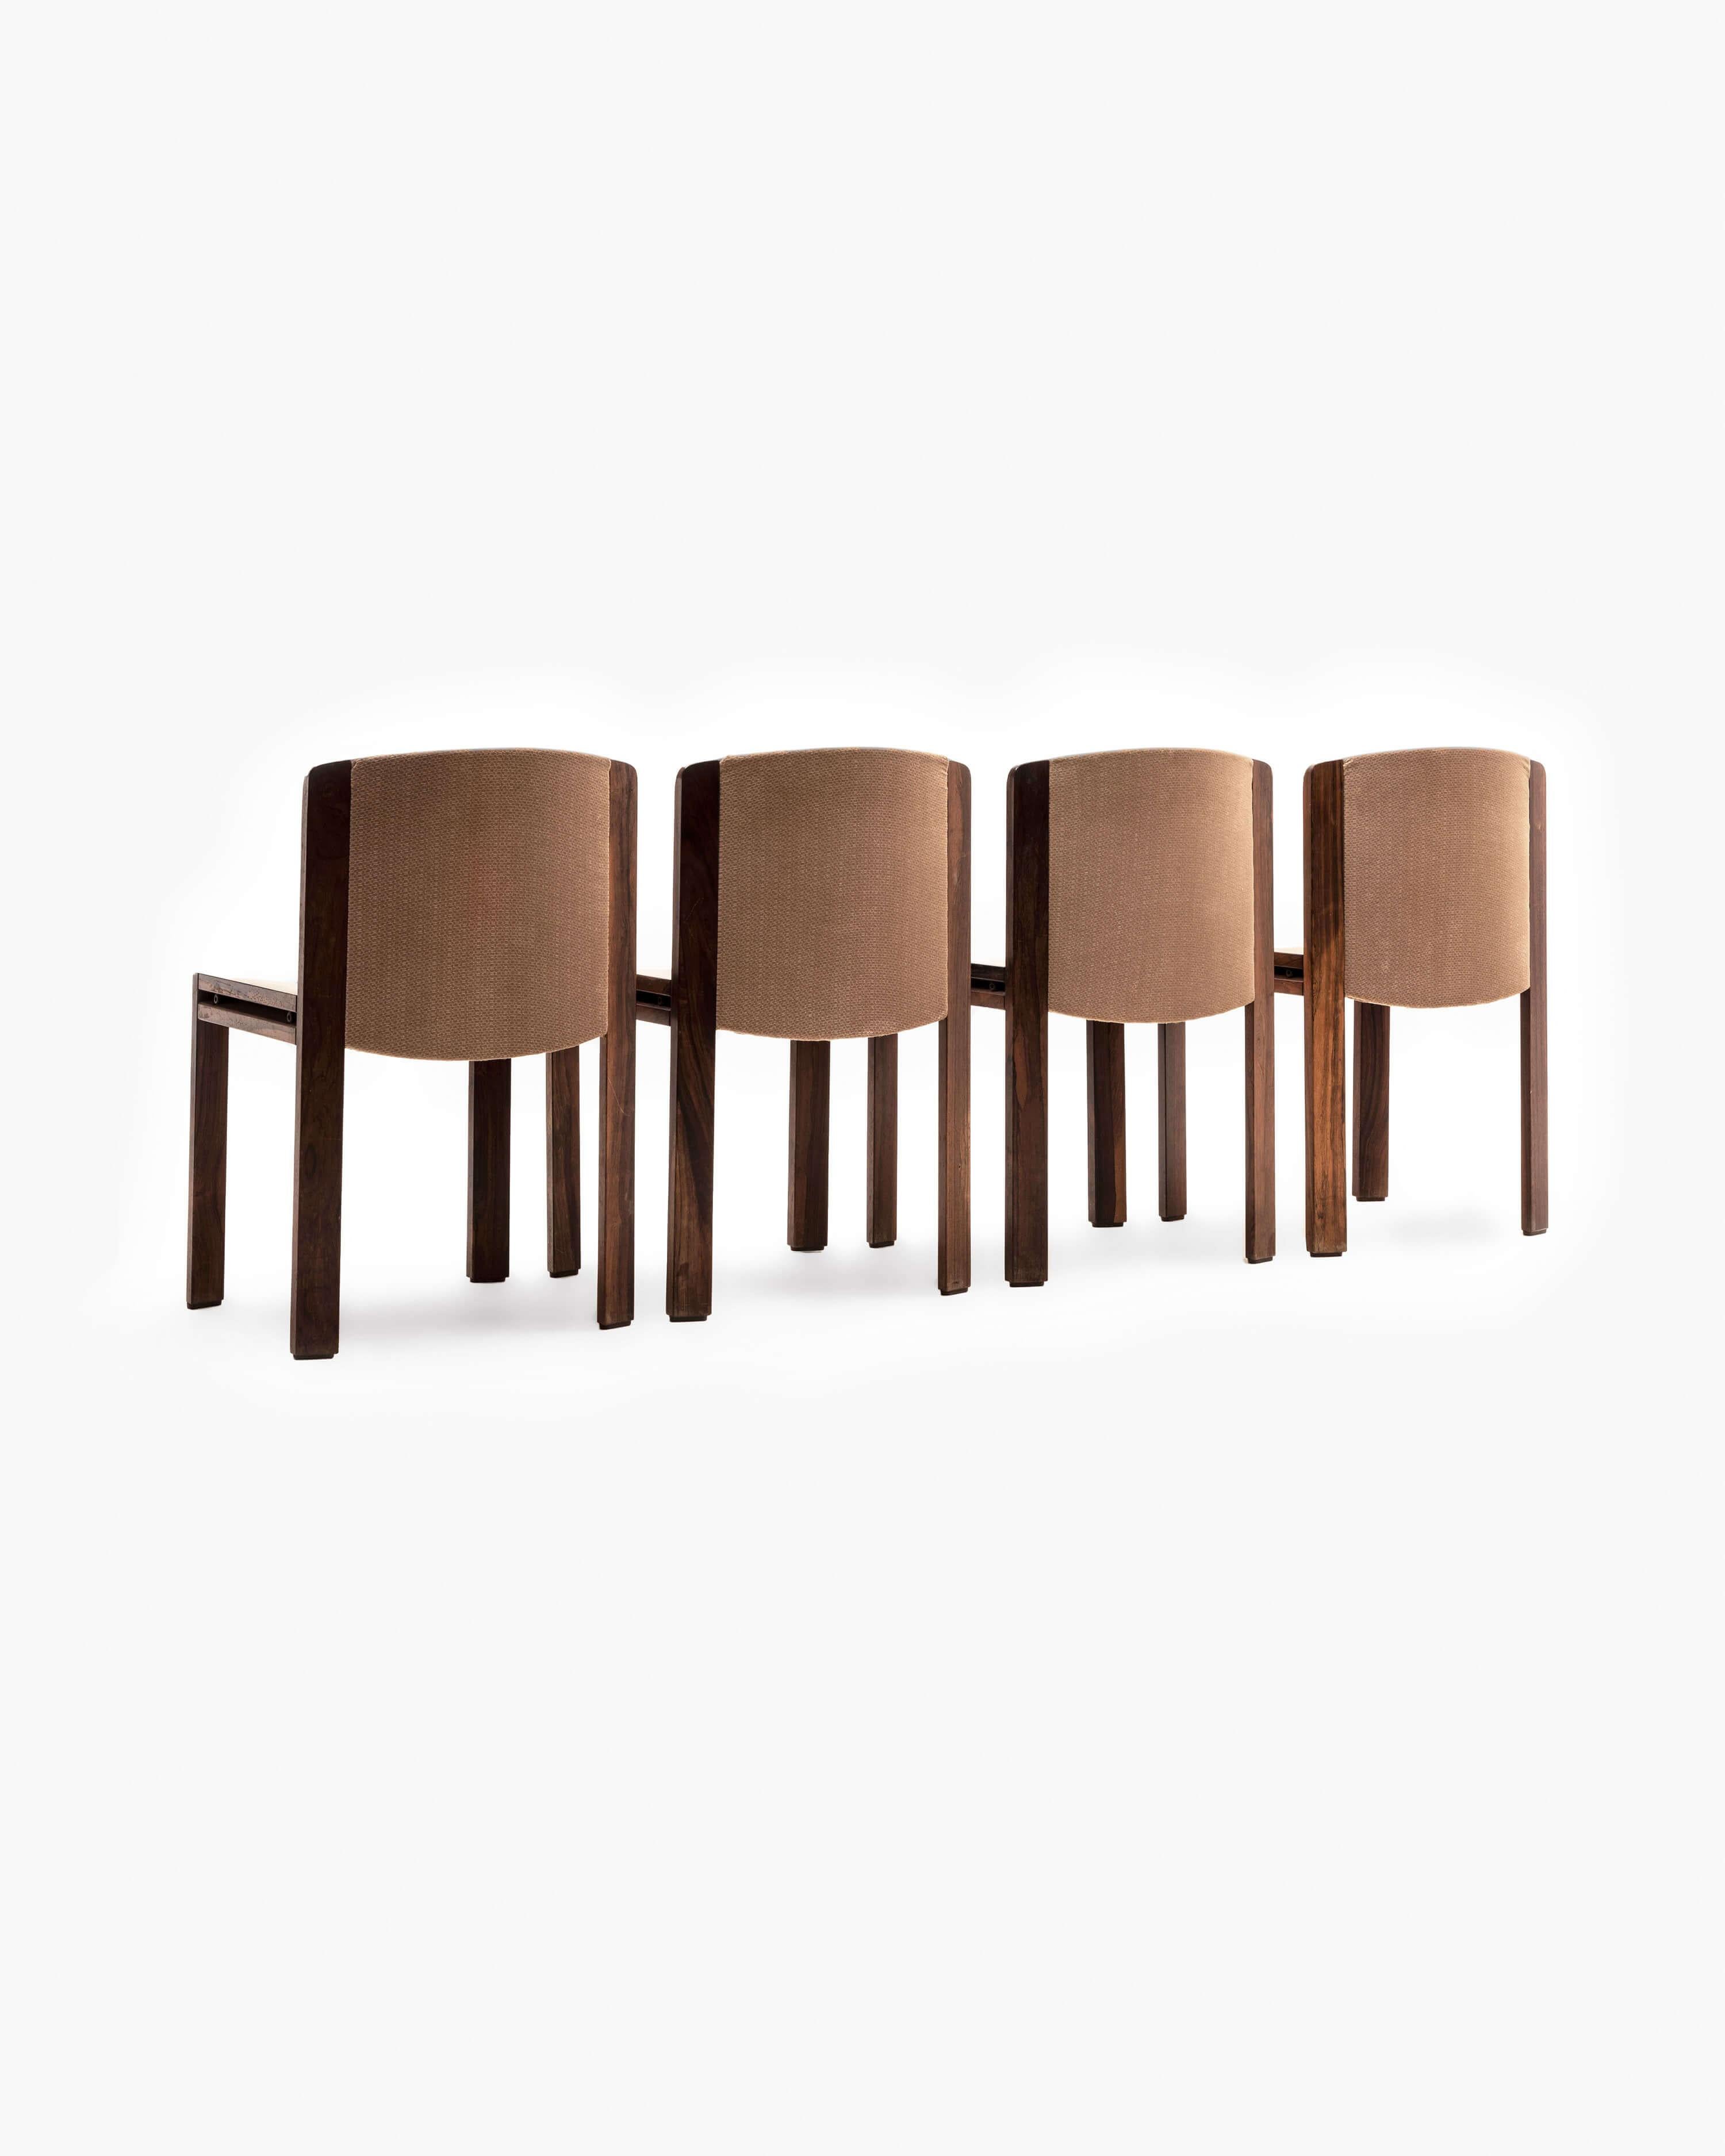 Stained Set of Four Original Model 300 Chairs for Karakter by Joe Colombo, 1965 For Sale